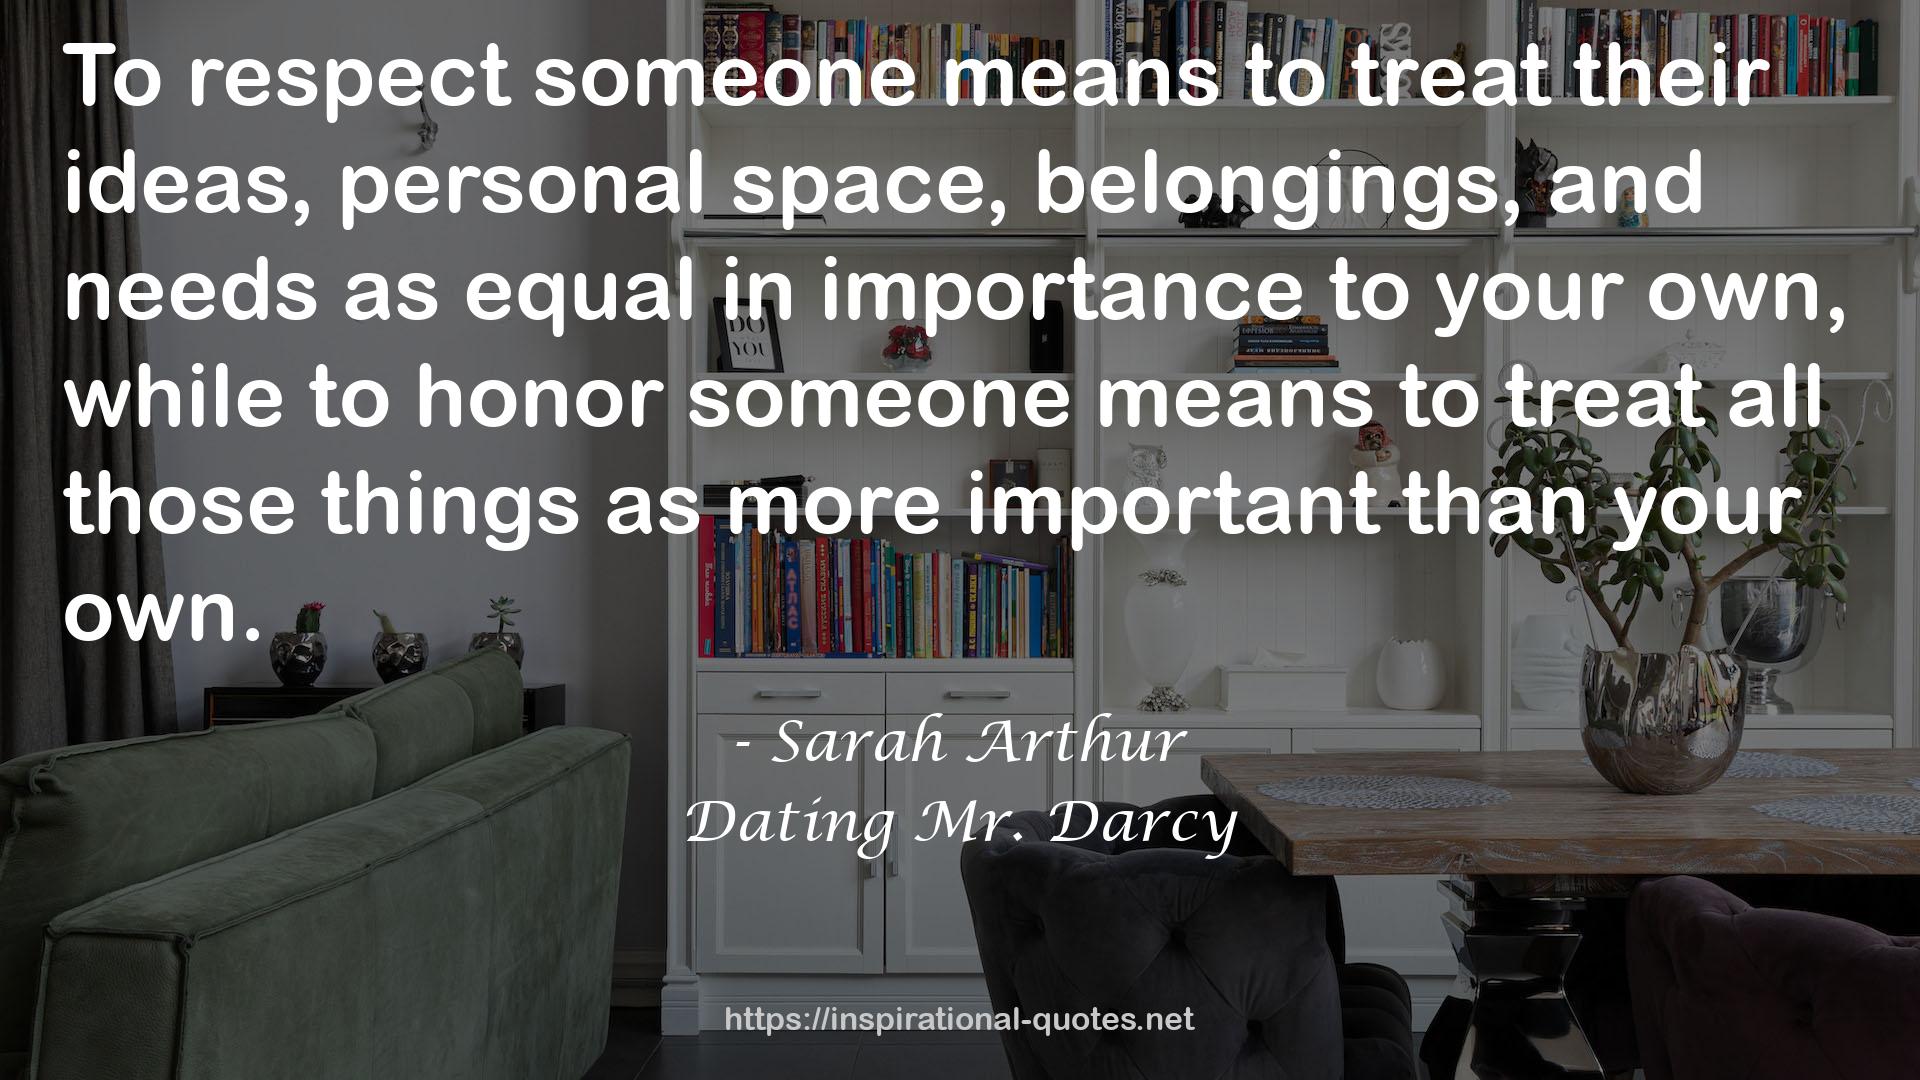 Dating Mr. Darcy QUOTES